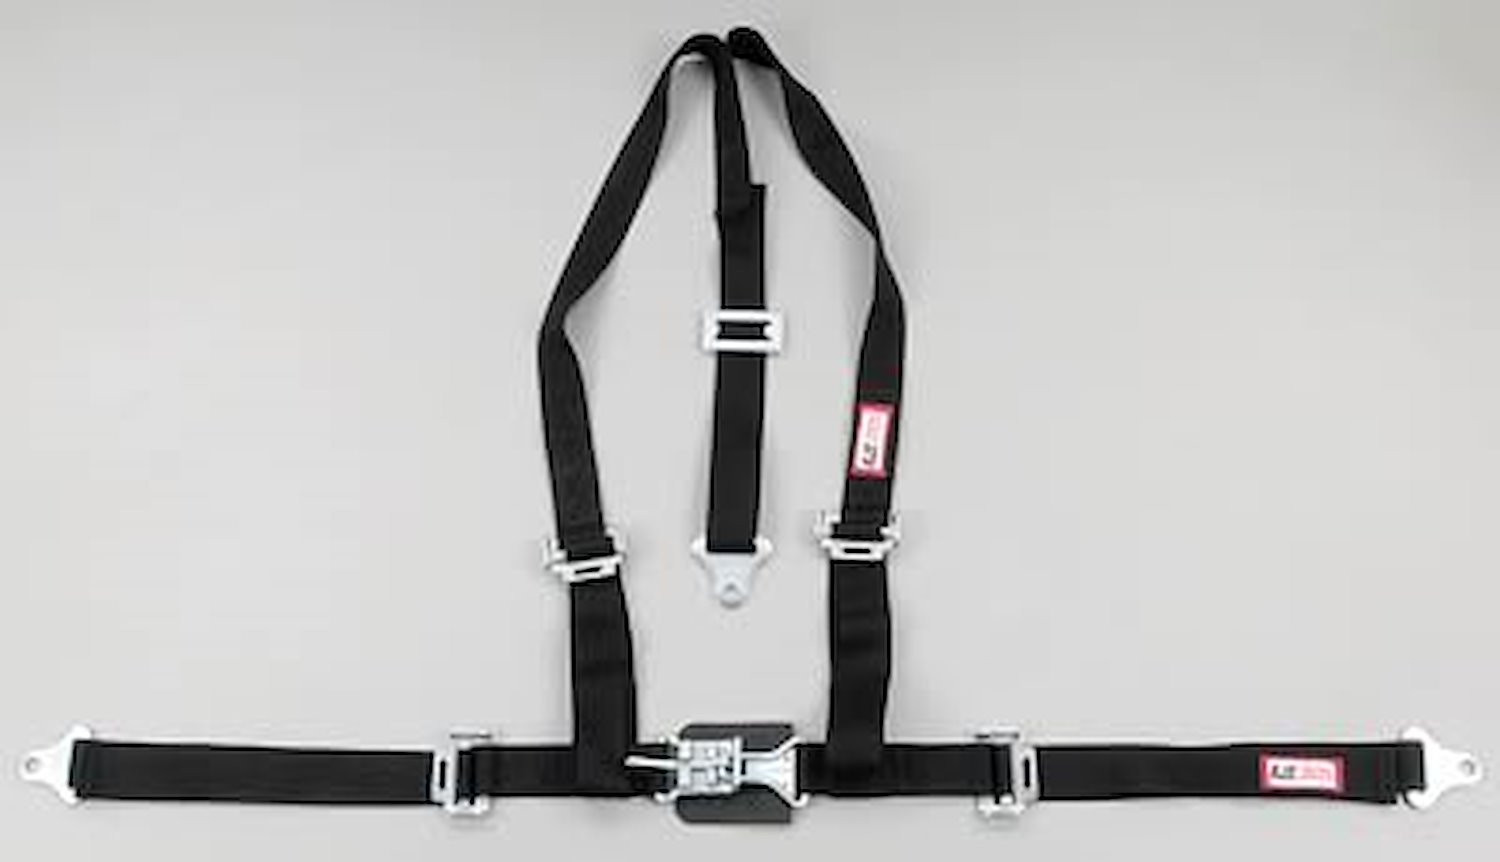 NON-SFI L&L HARNESS 2 PULL DOWN Lap Belt SEWN IN 2 S.H. Y FLOOR Mount ALL WRAP ENDS KHAKI